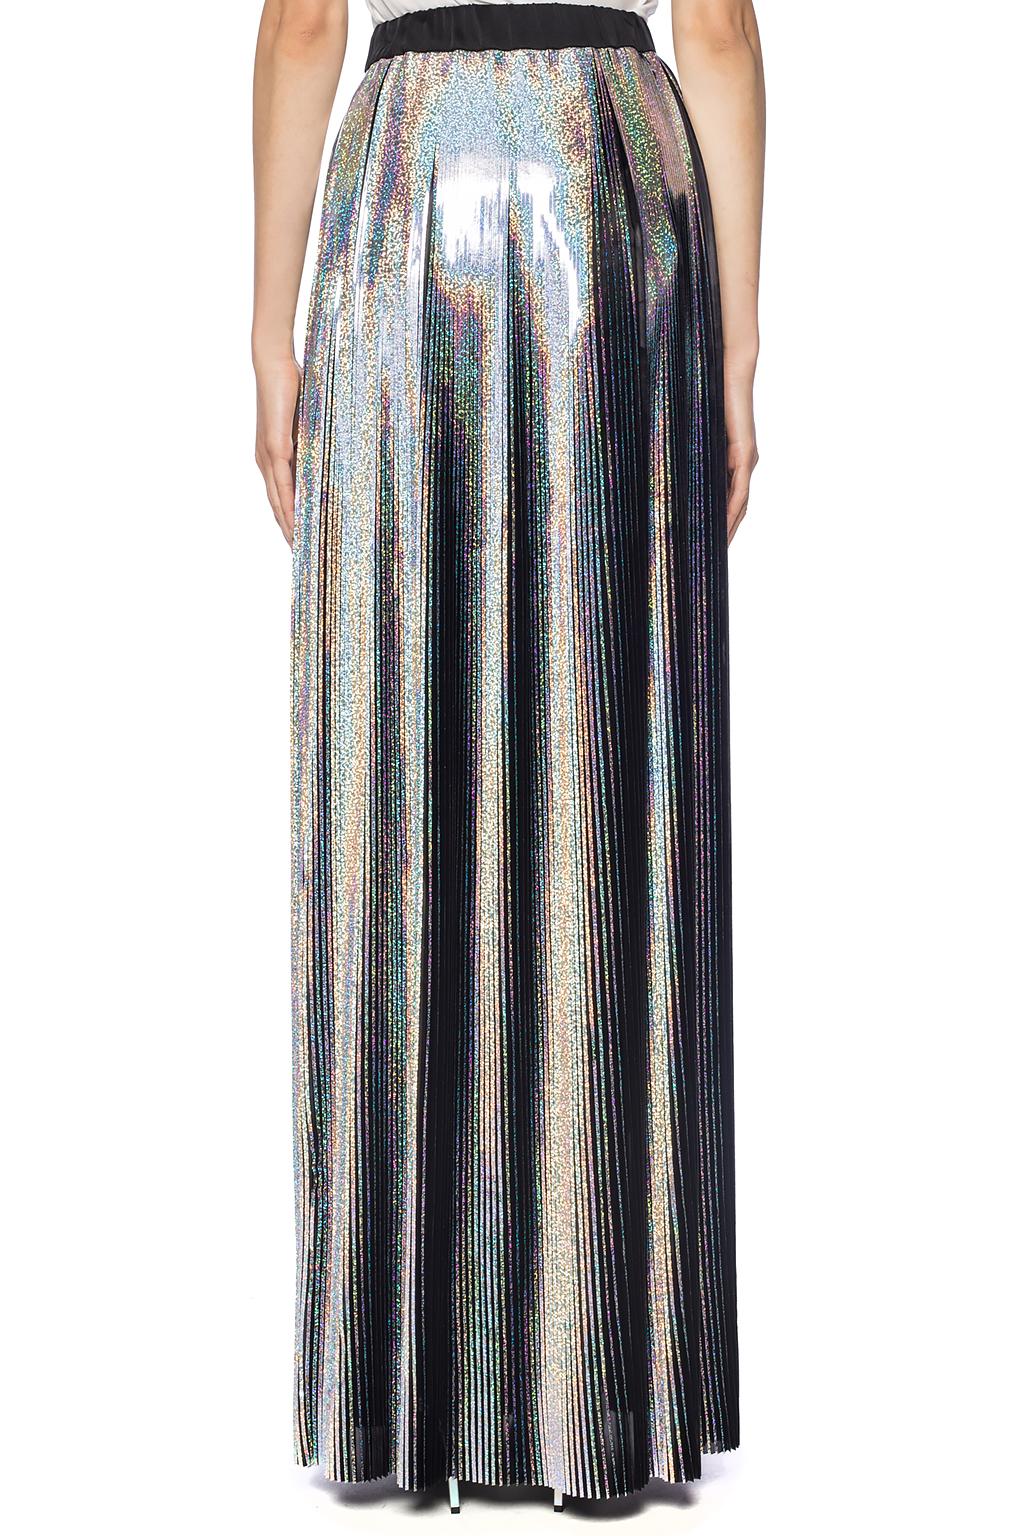 Balmain Pleated skirt with the holographic effect | Women's Clothing ...